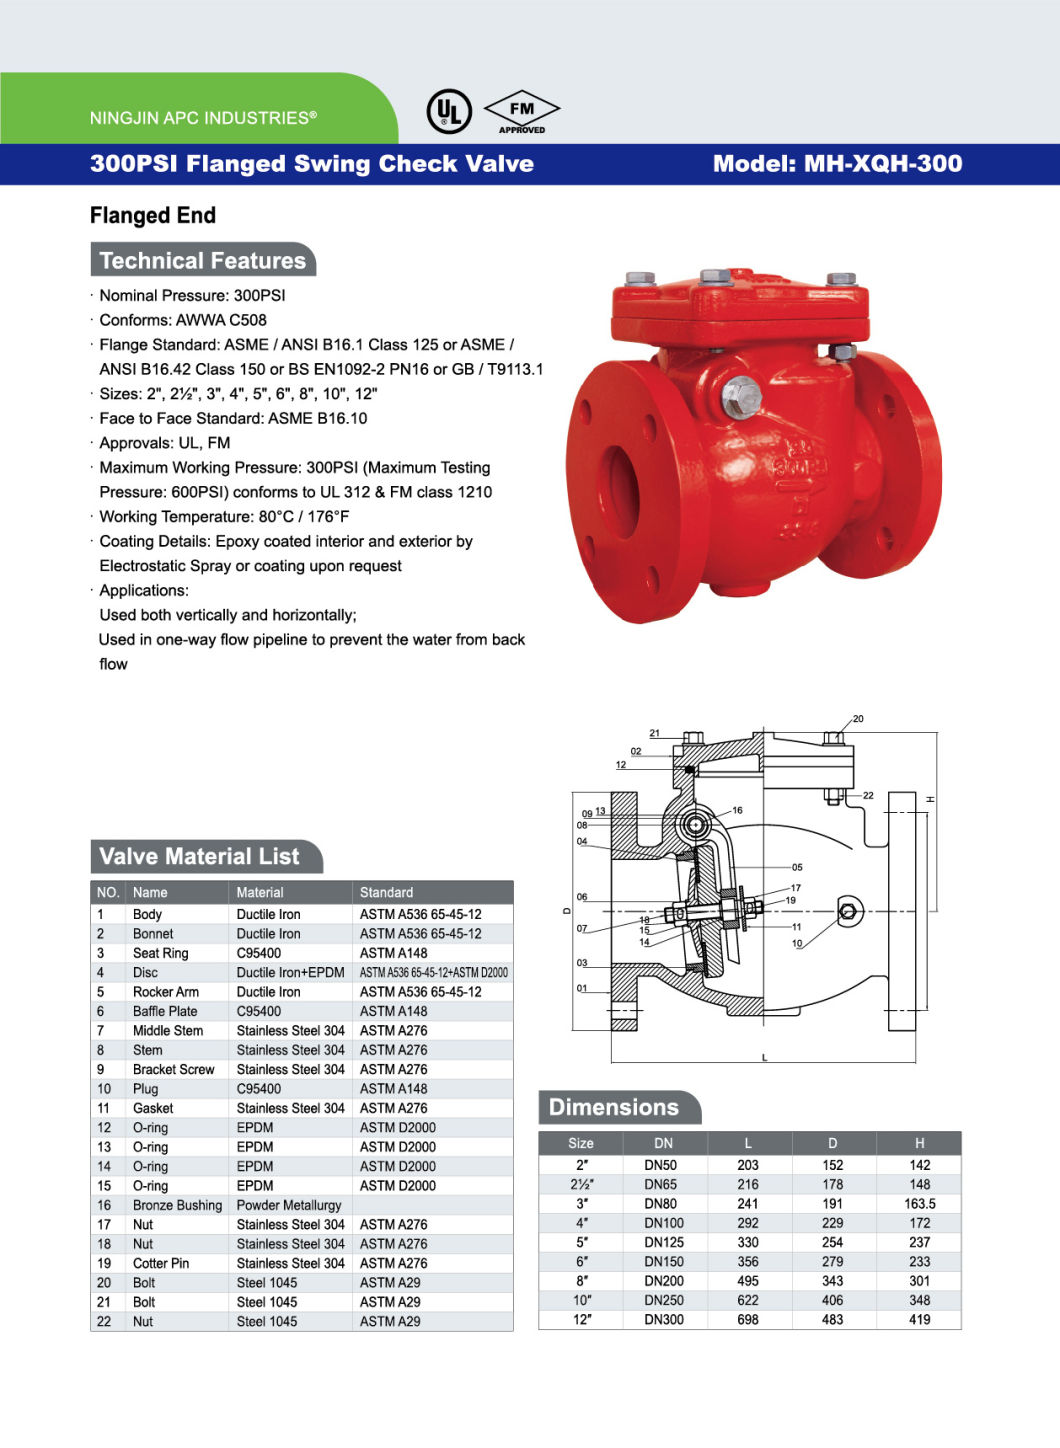 300psi Swing Check Valve Flange Type FM UL Approved Fire Protection Valve